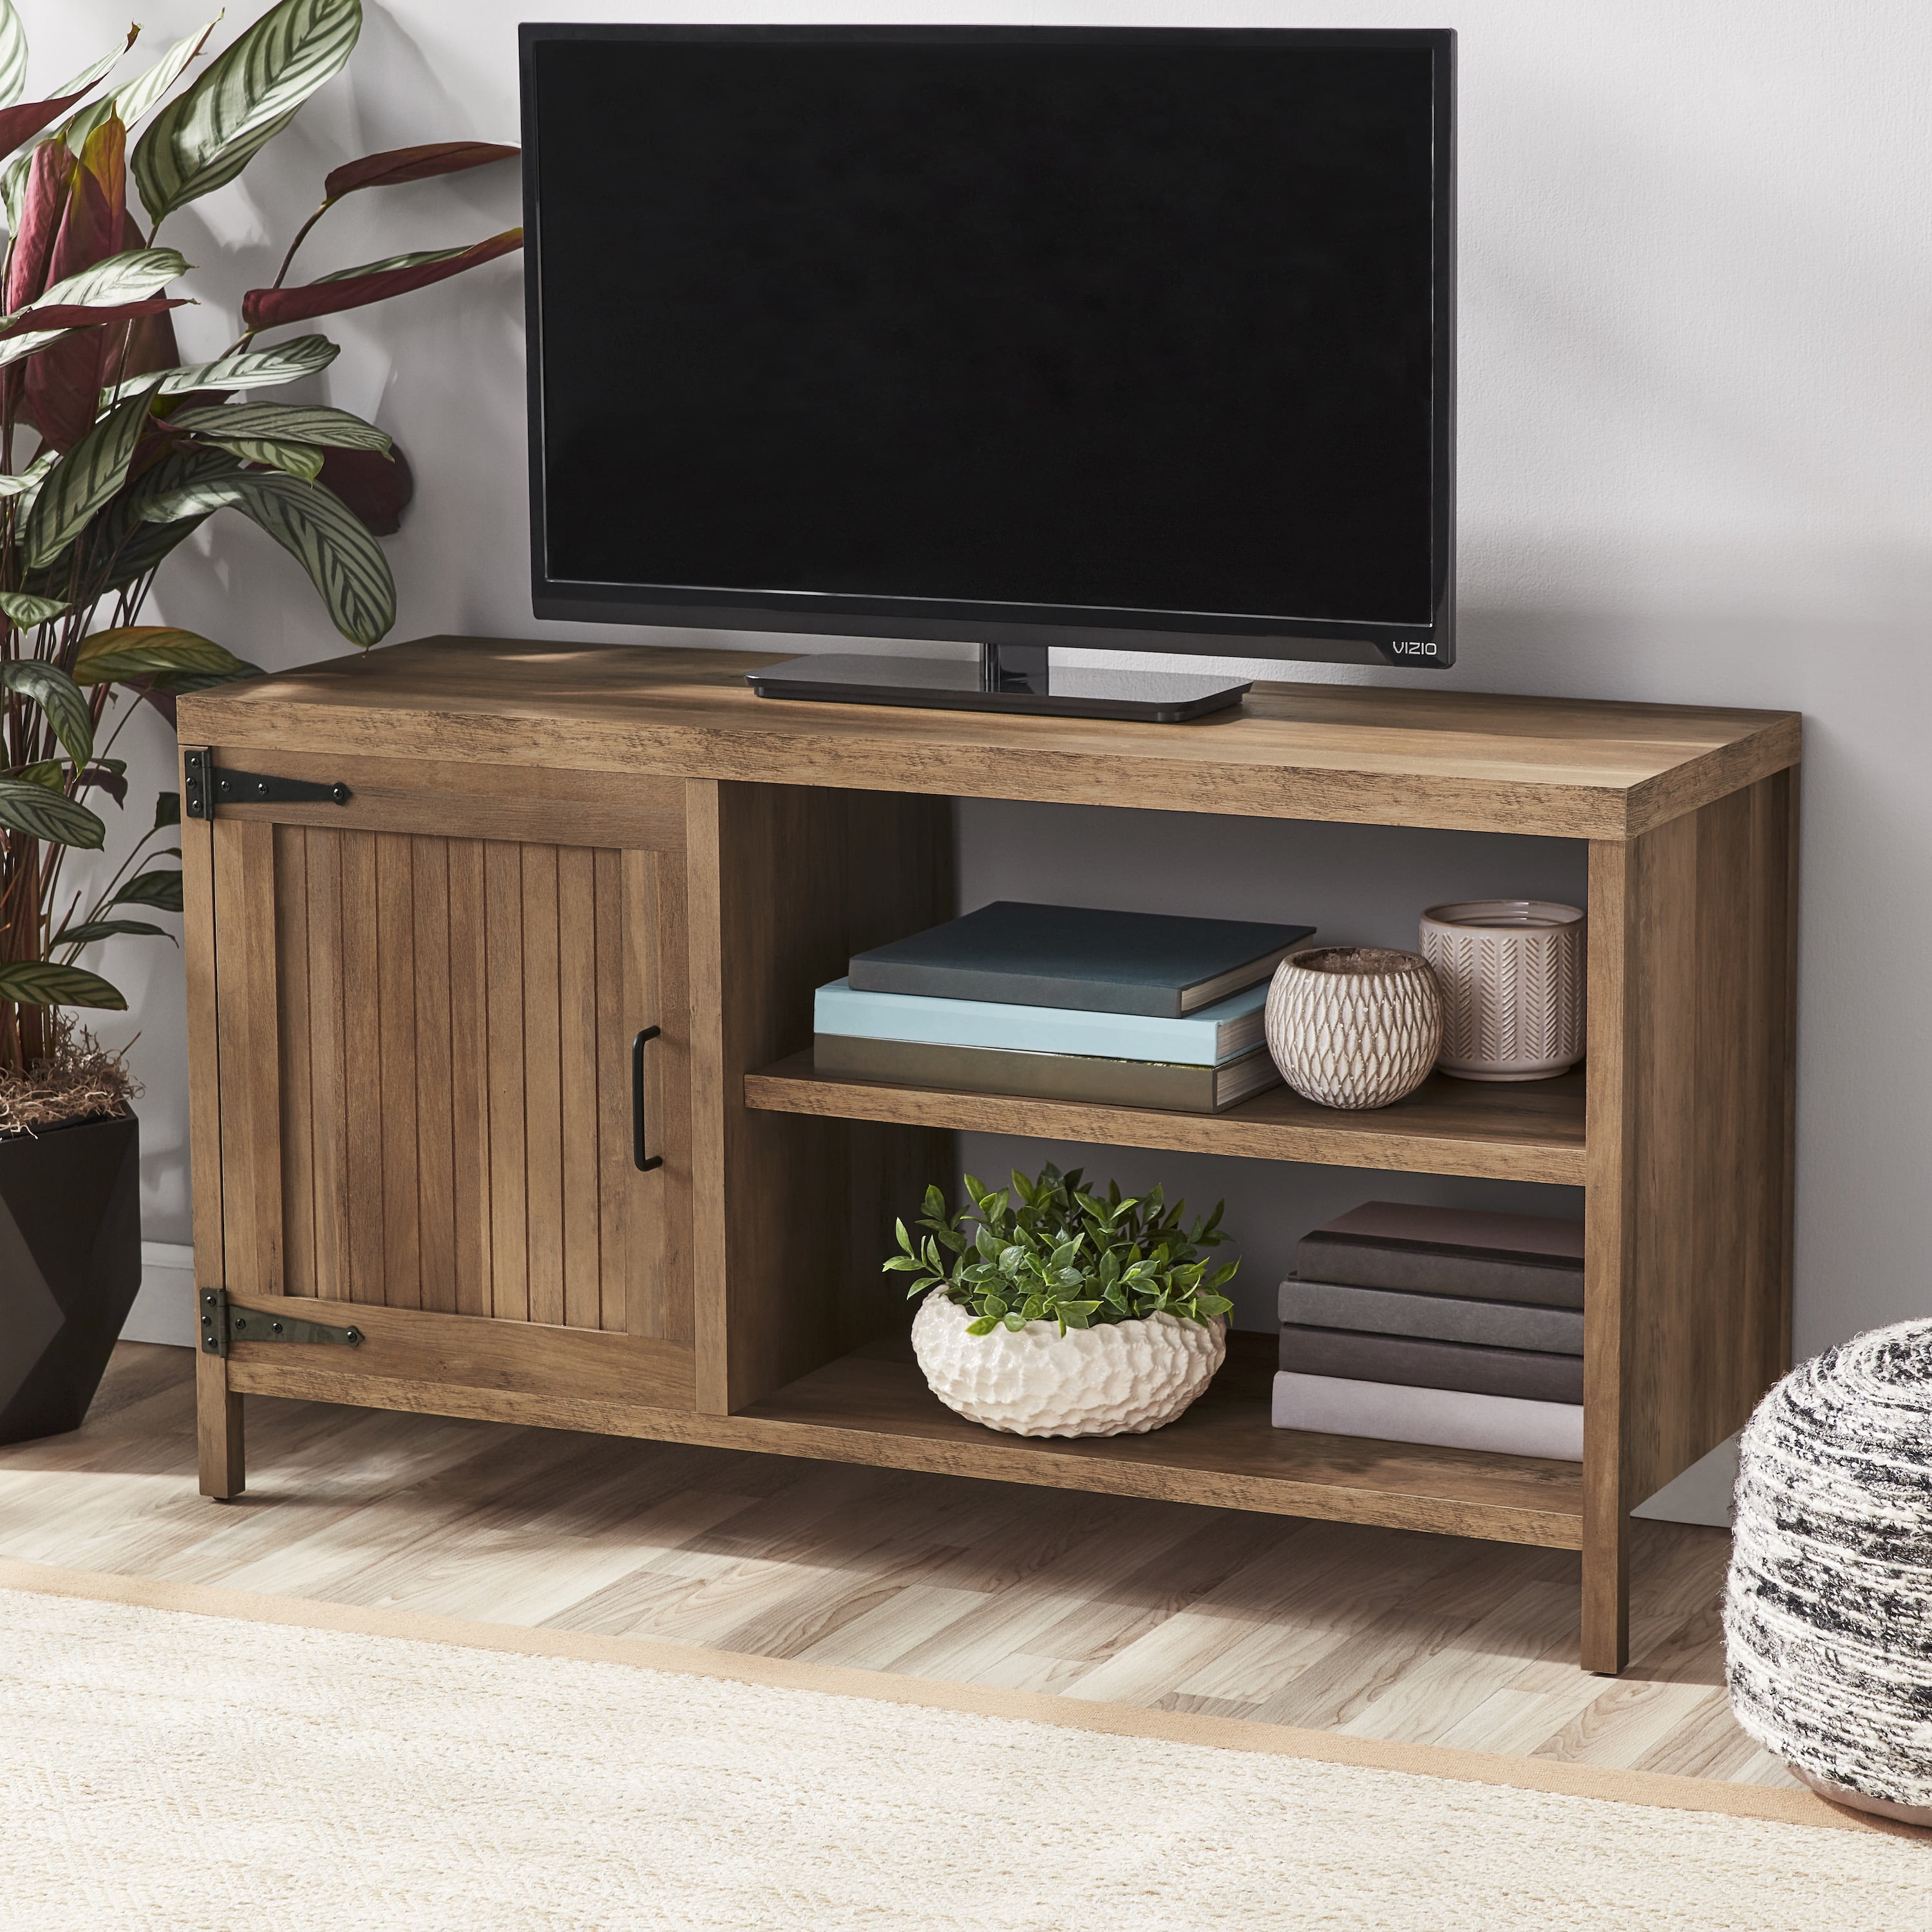 Mainstays Farmhouse TV Stand for TV's up to 50" (Rustic Weather Oak or Rustic Gray) $68 + Free Shipping